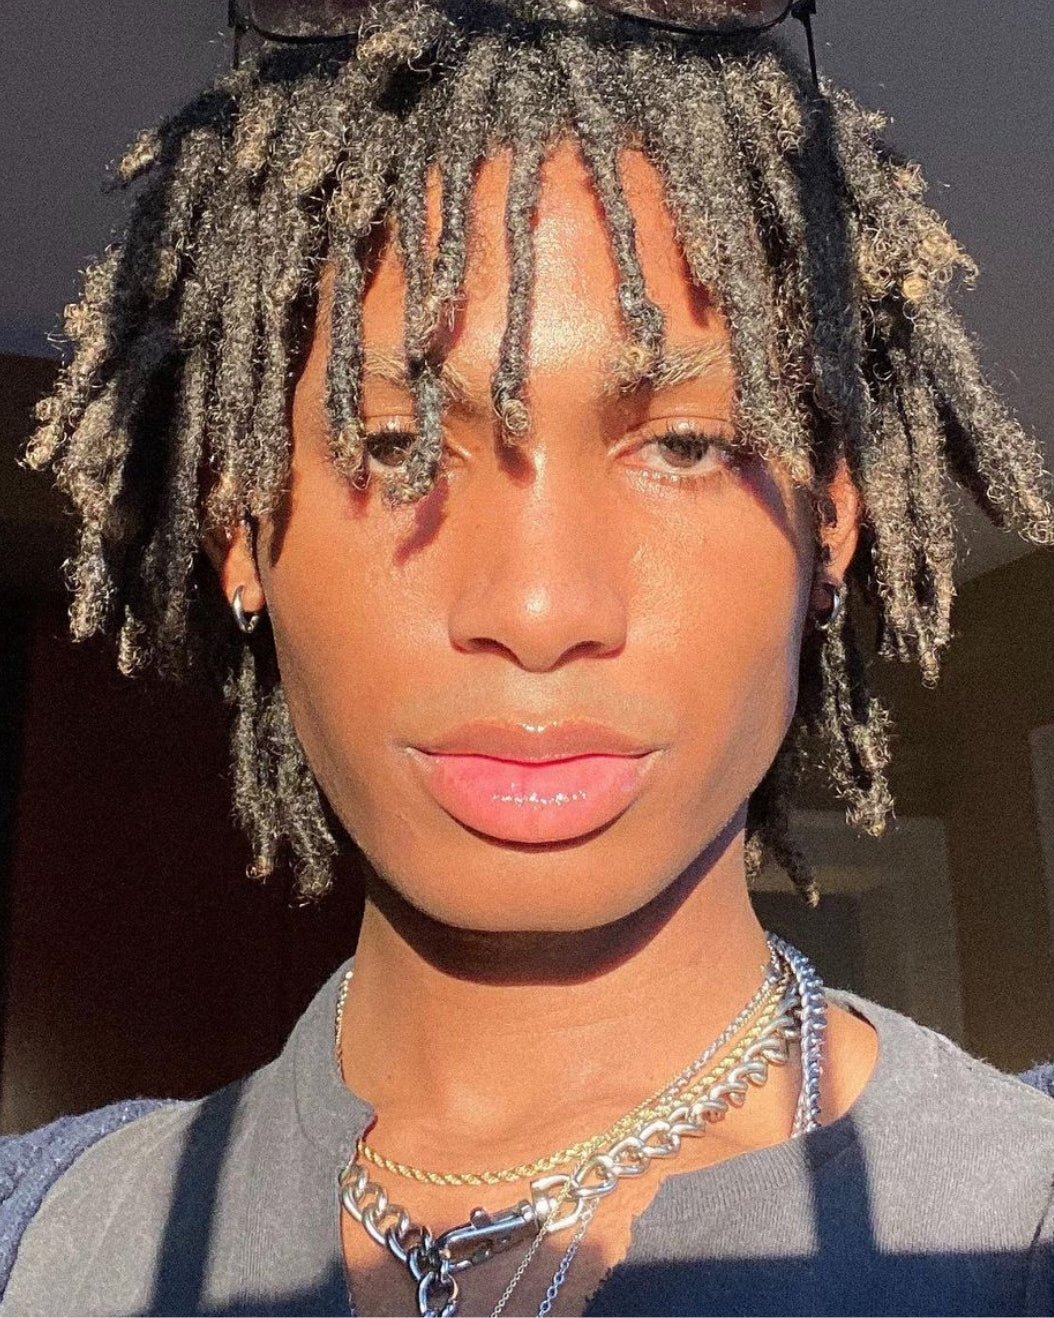 Portrait of a person with dewy skin and short locs to use as holiday makeup inspiration